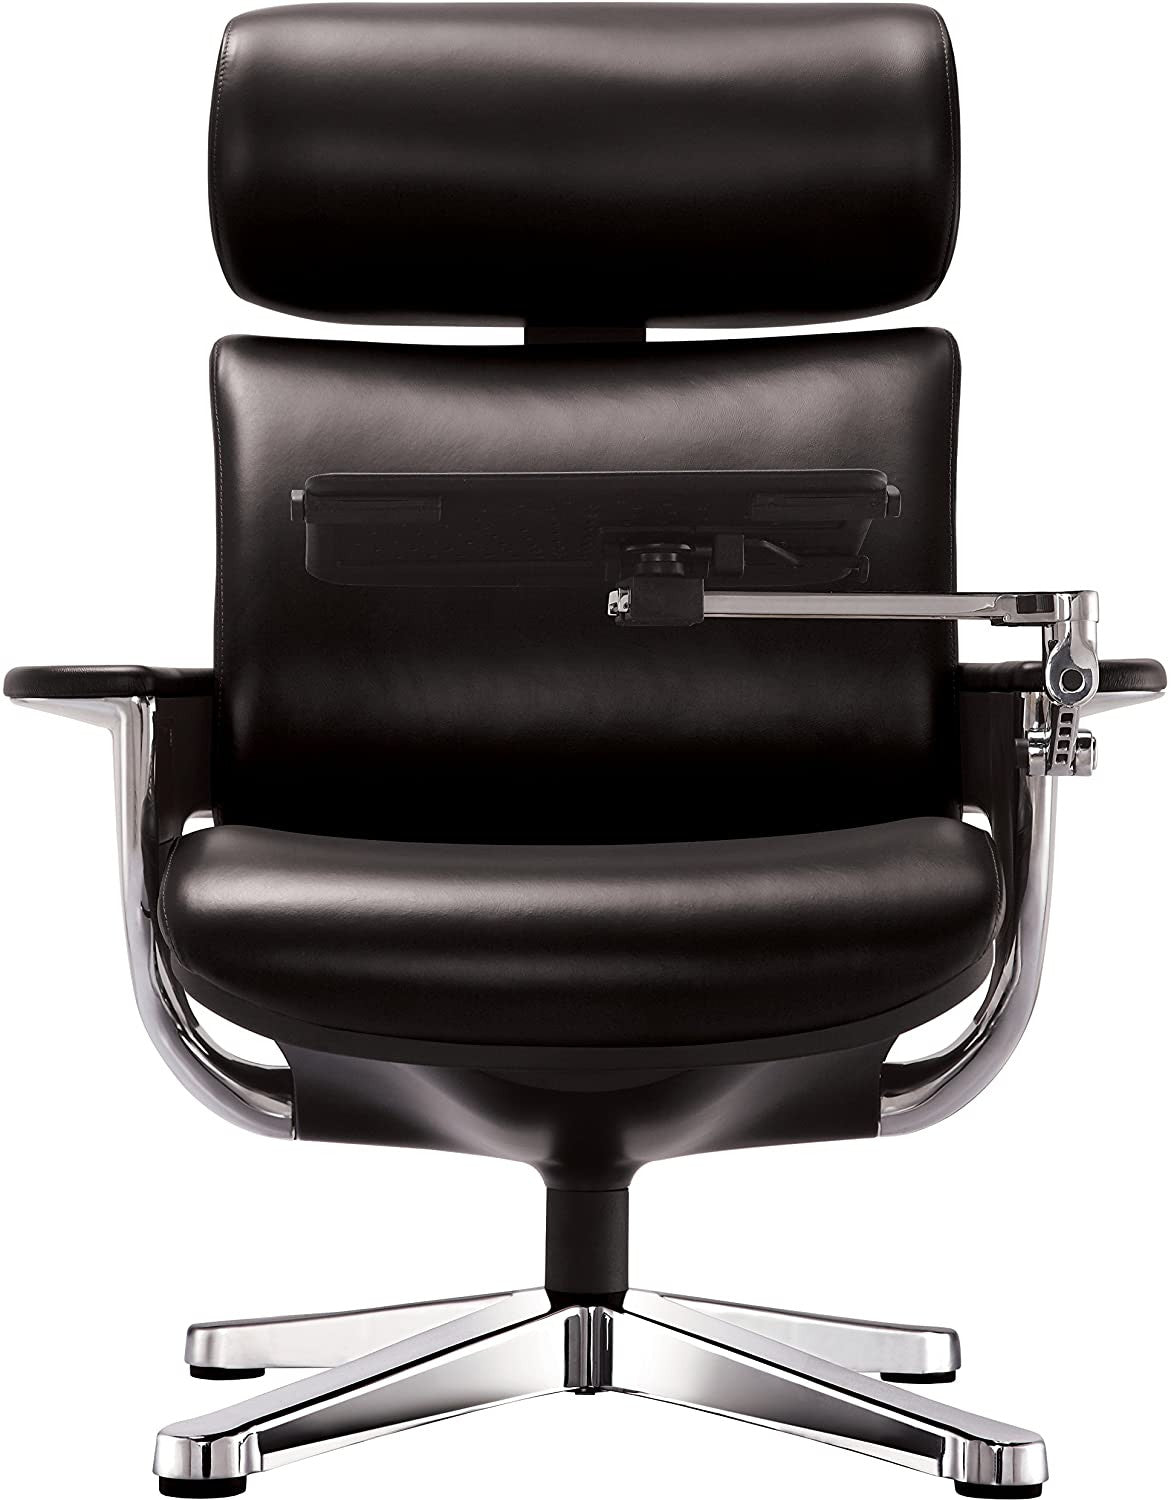 Black and Silver Swivel Faux Leather Executive Office Chair